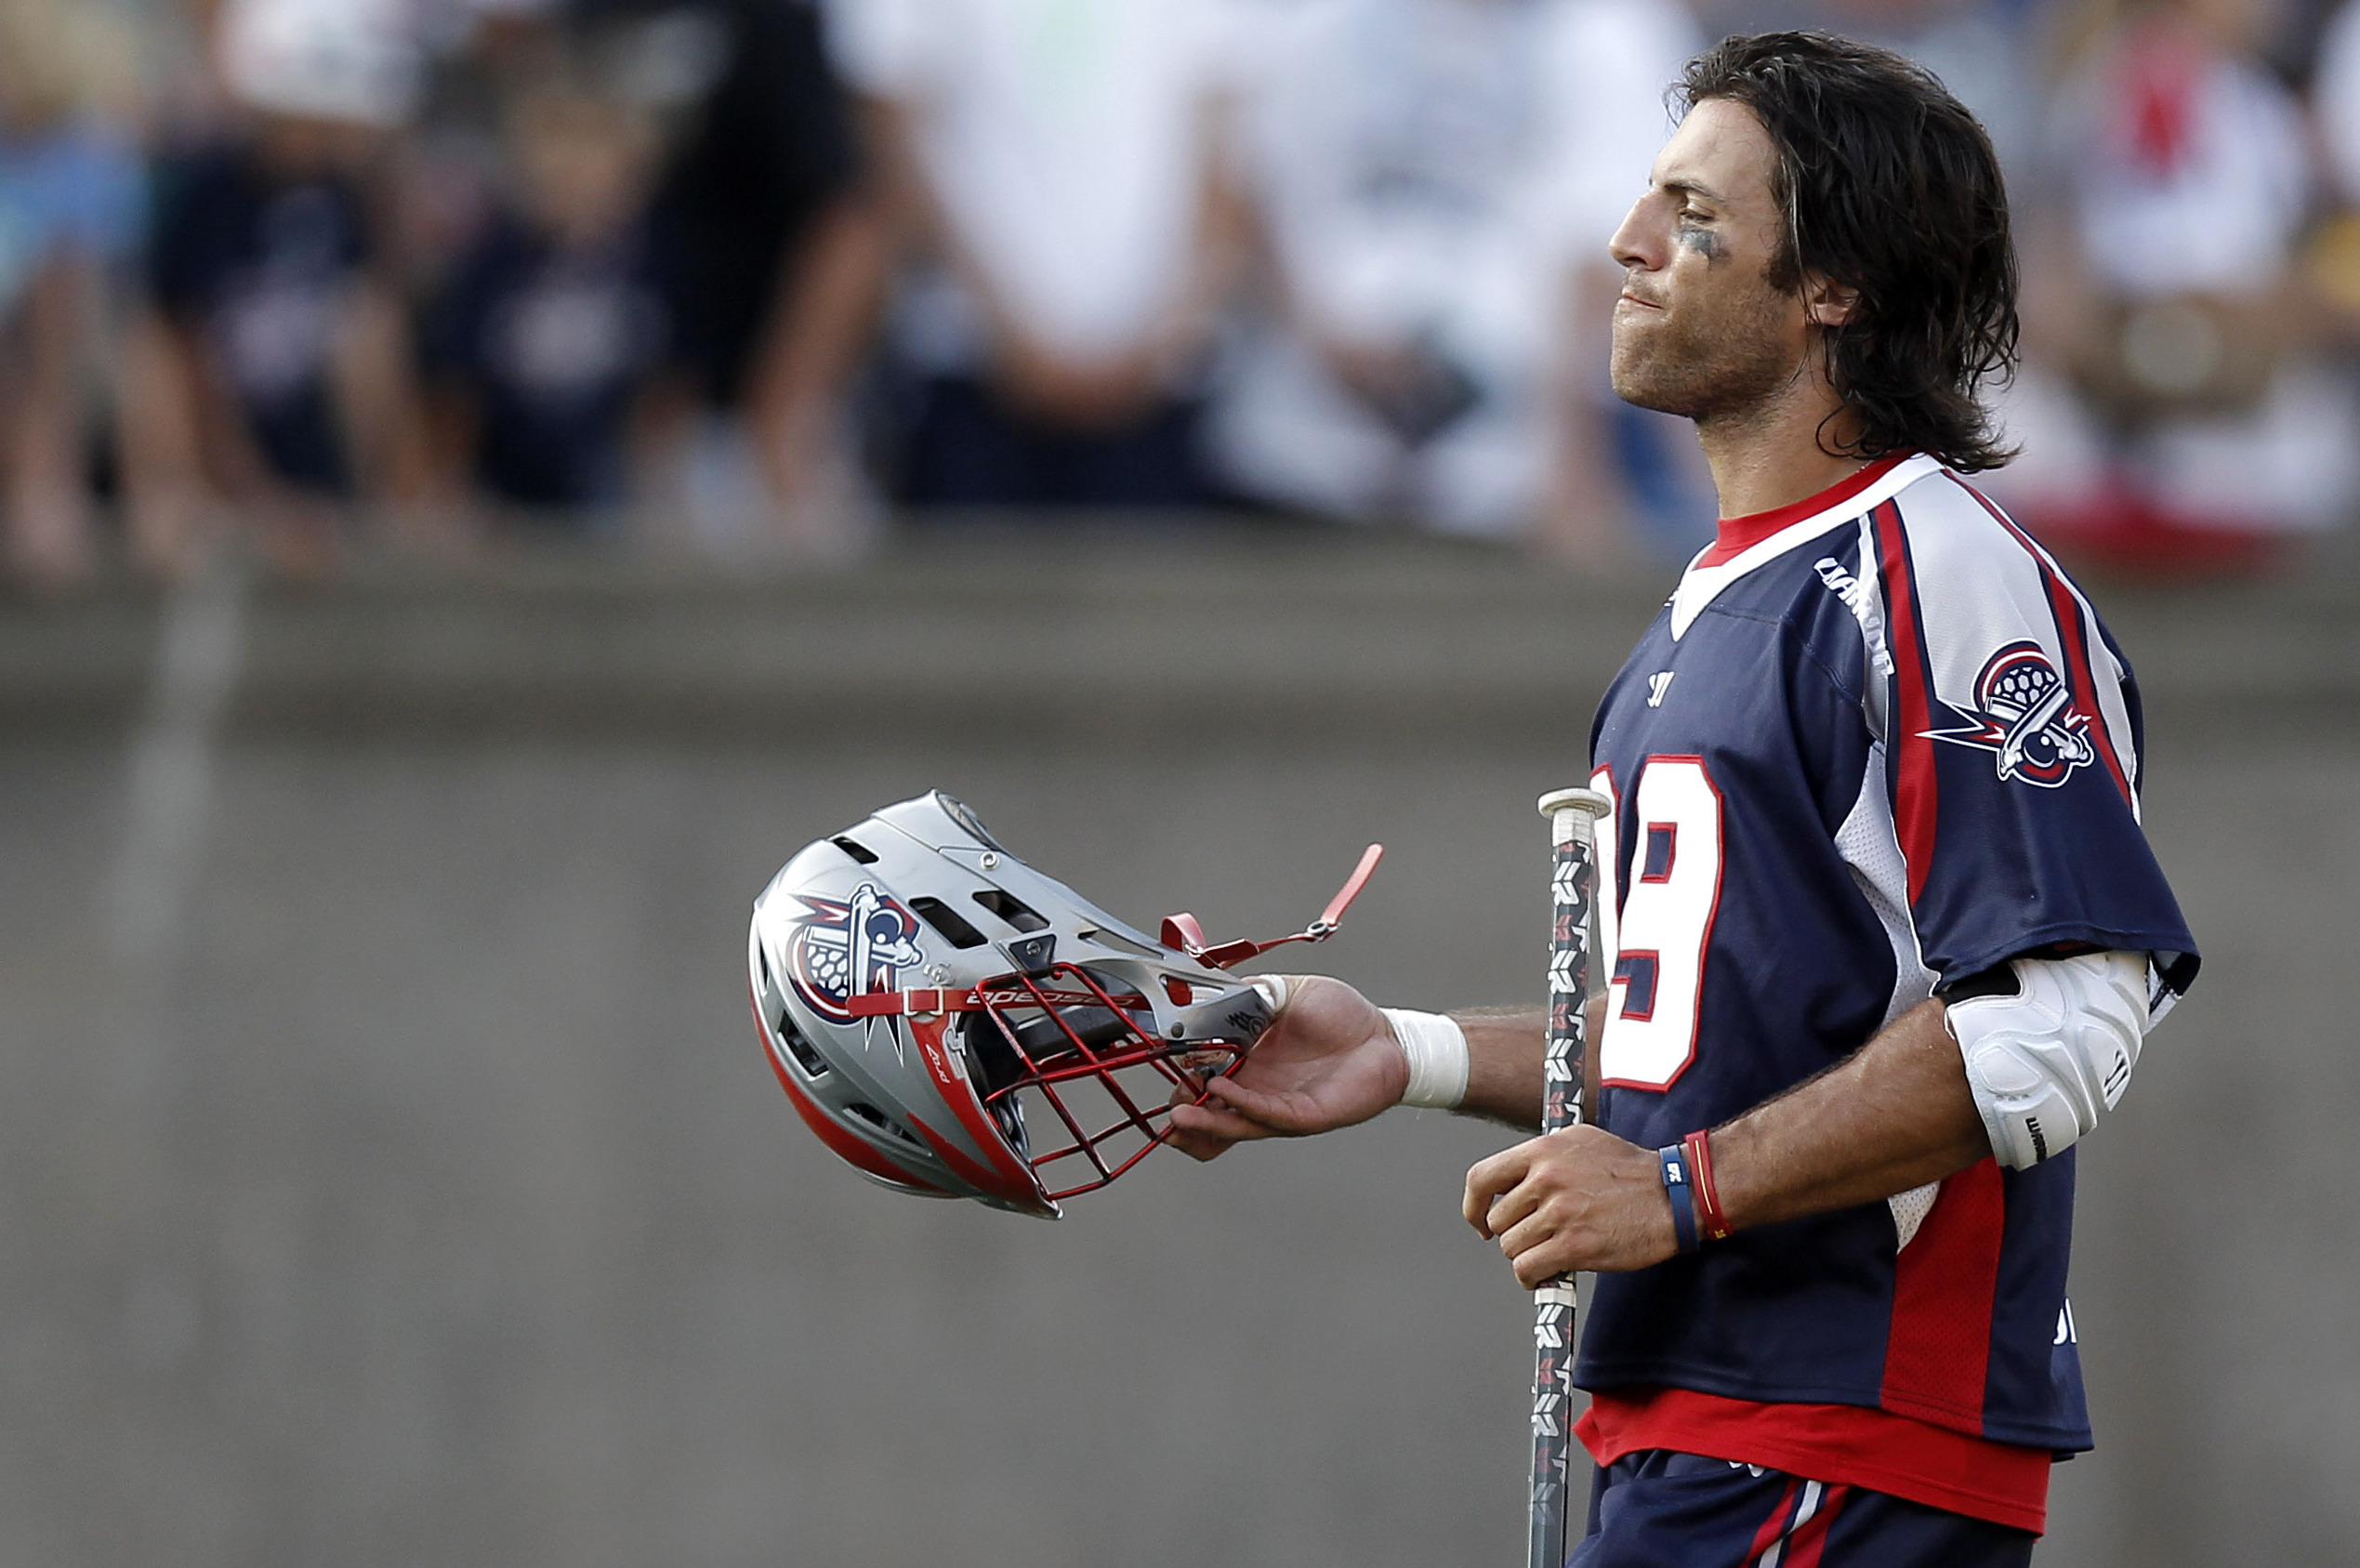 Lacrosse Star Paul Rabil's Battle To Redefine The Sport Highlighted In  LeBron James Documentary